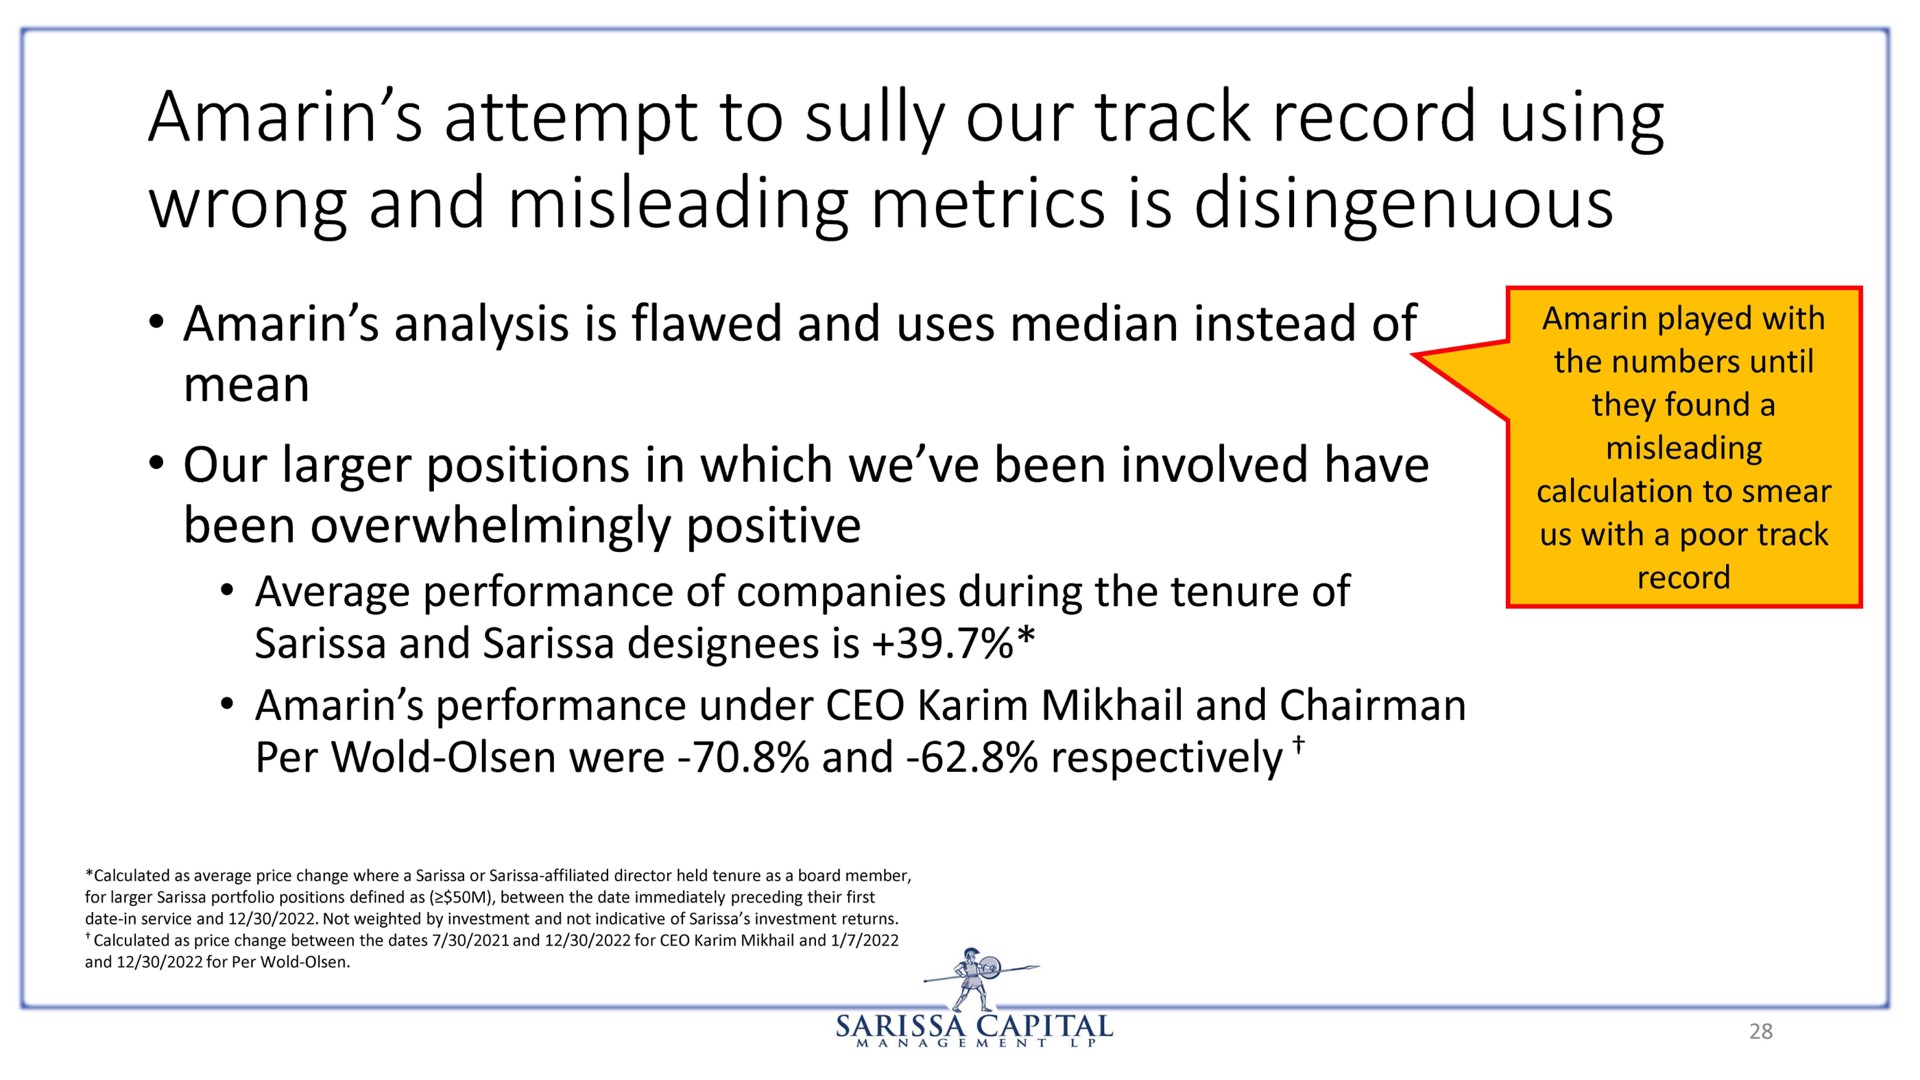 amarin attempt to sully our track record using wrong and misleading metrics is disingenuous our positions in which we been involved have capital | Sarissa Capital